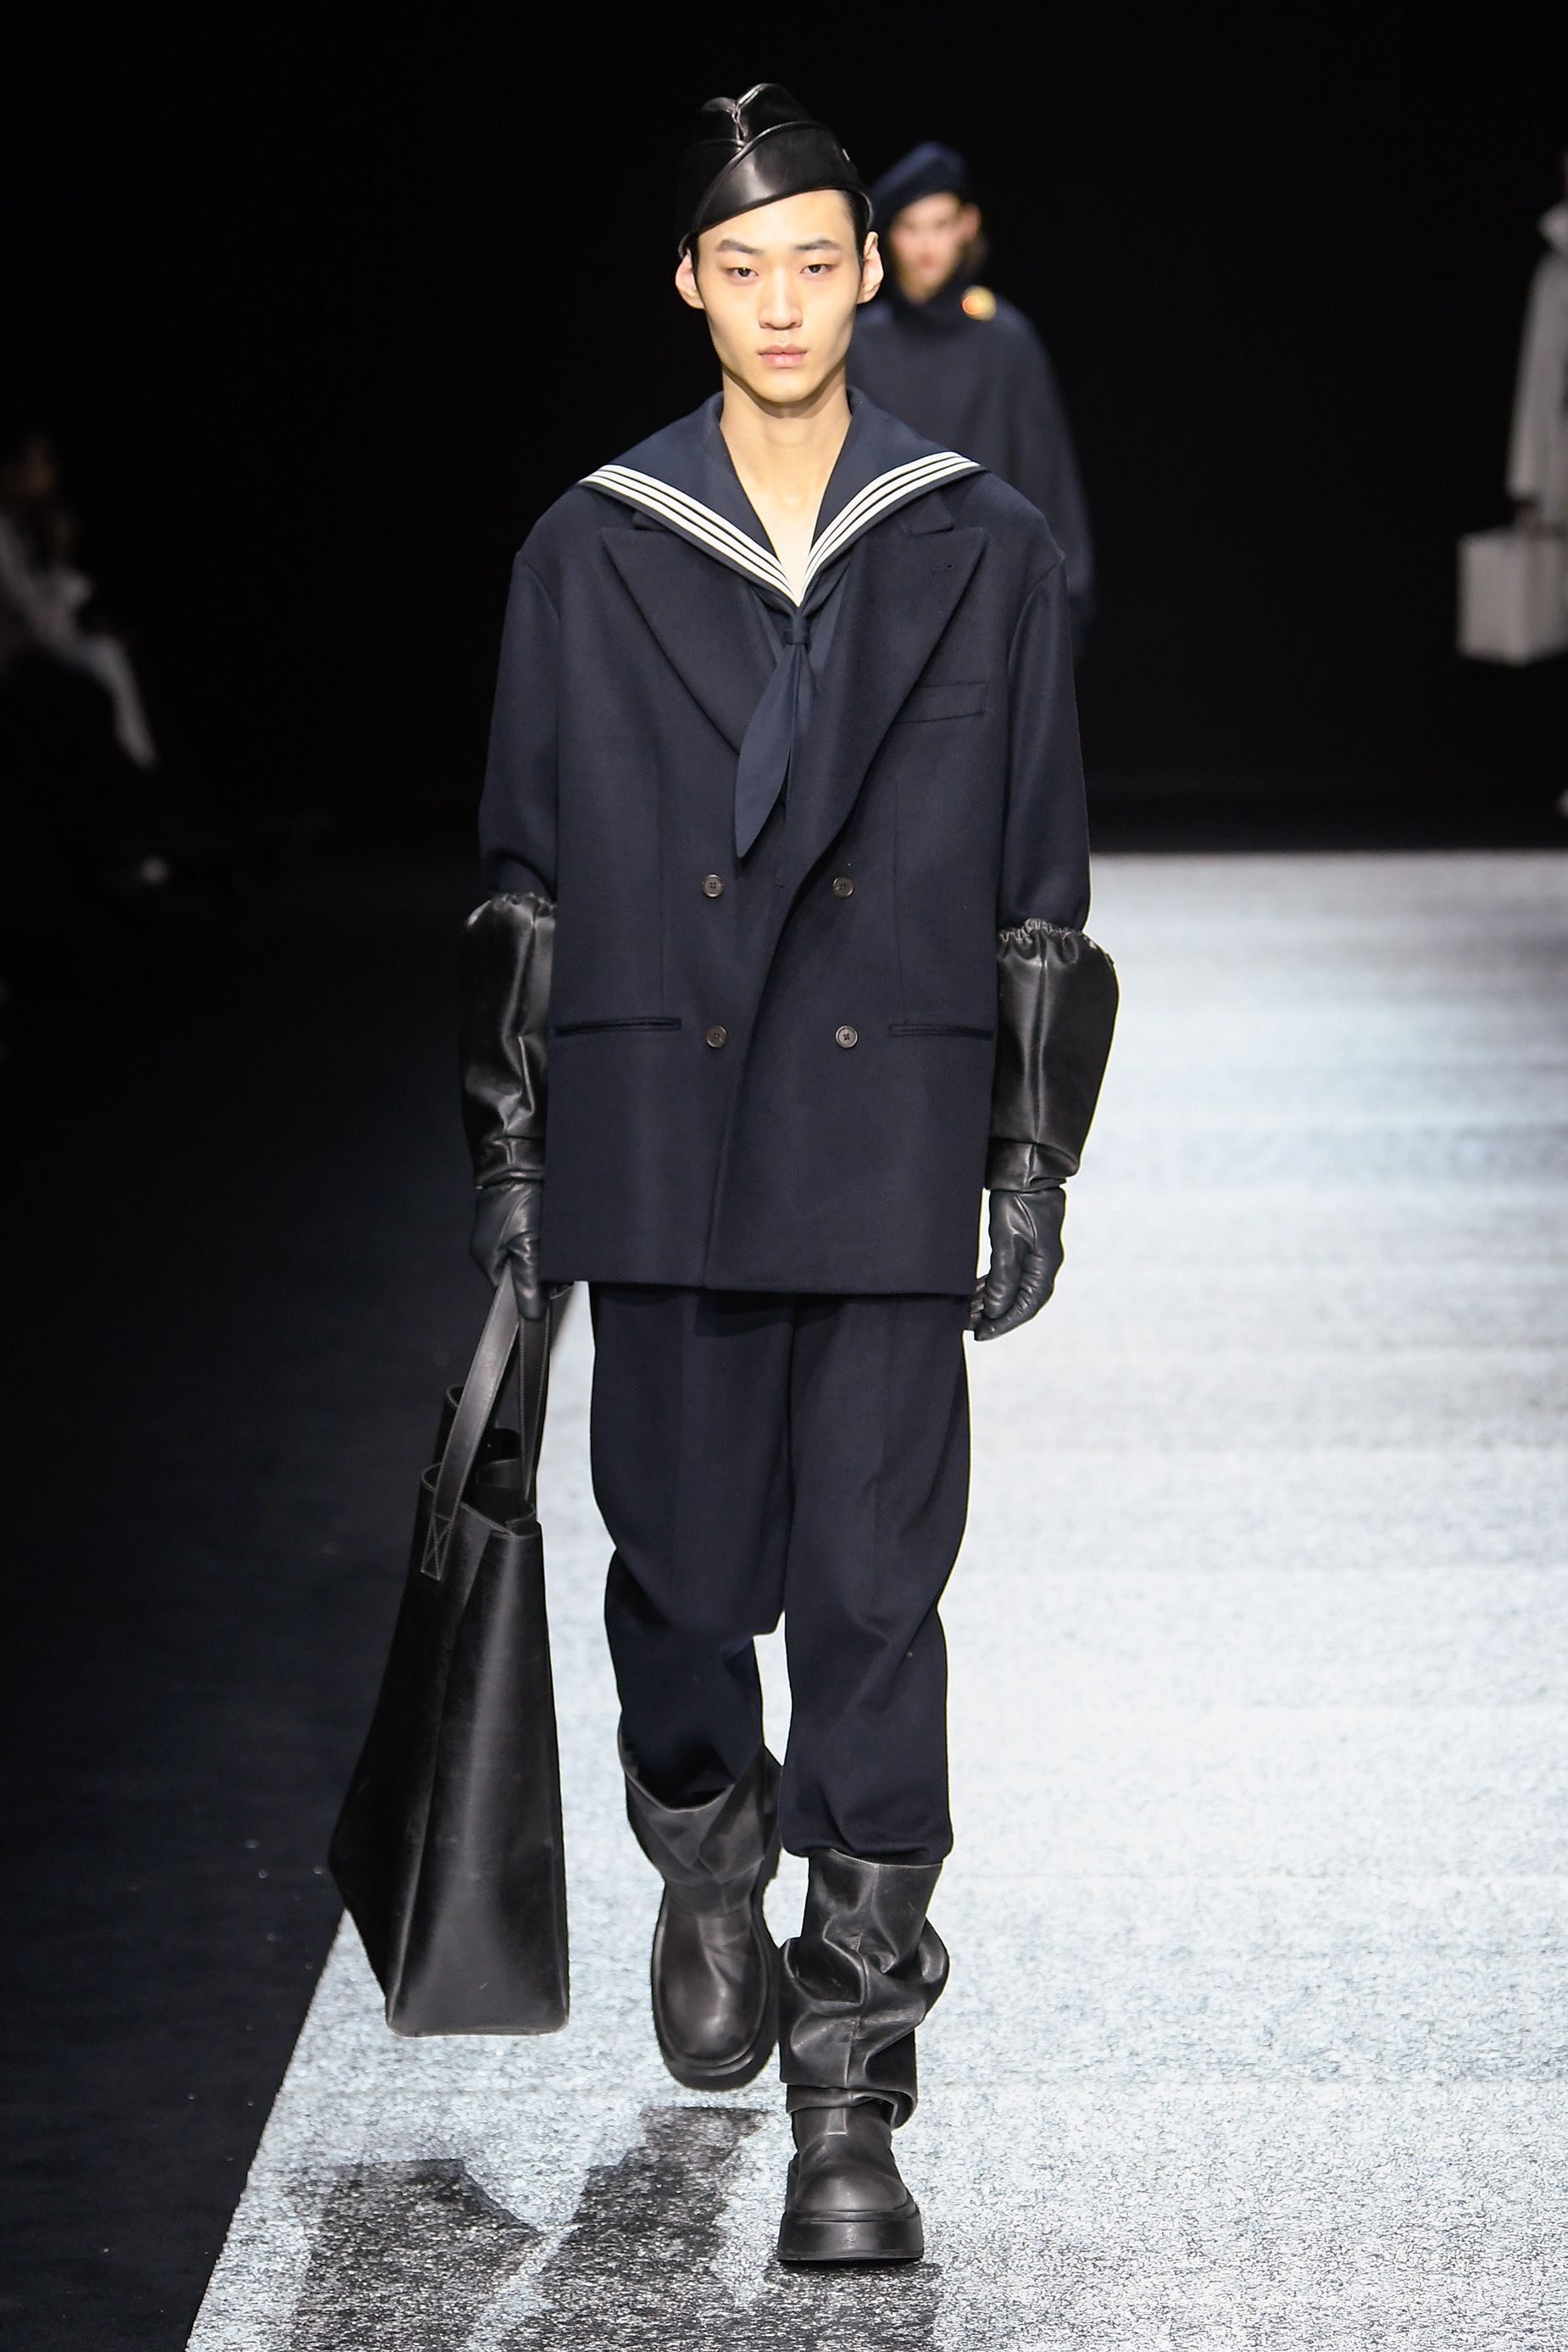 A seafaring element was evident in the collection at Emporio Armani too.